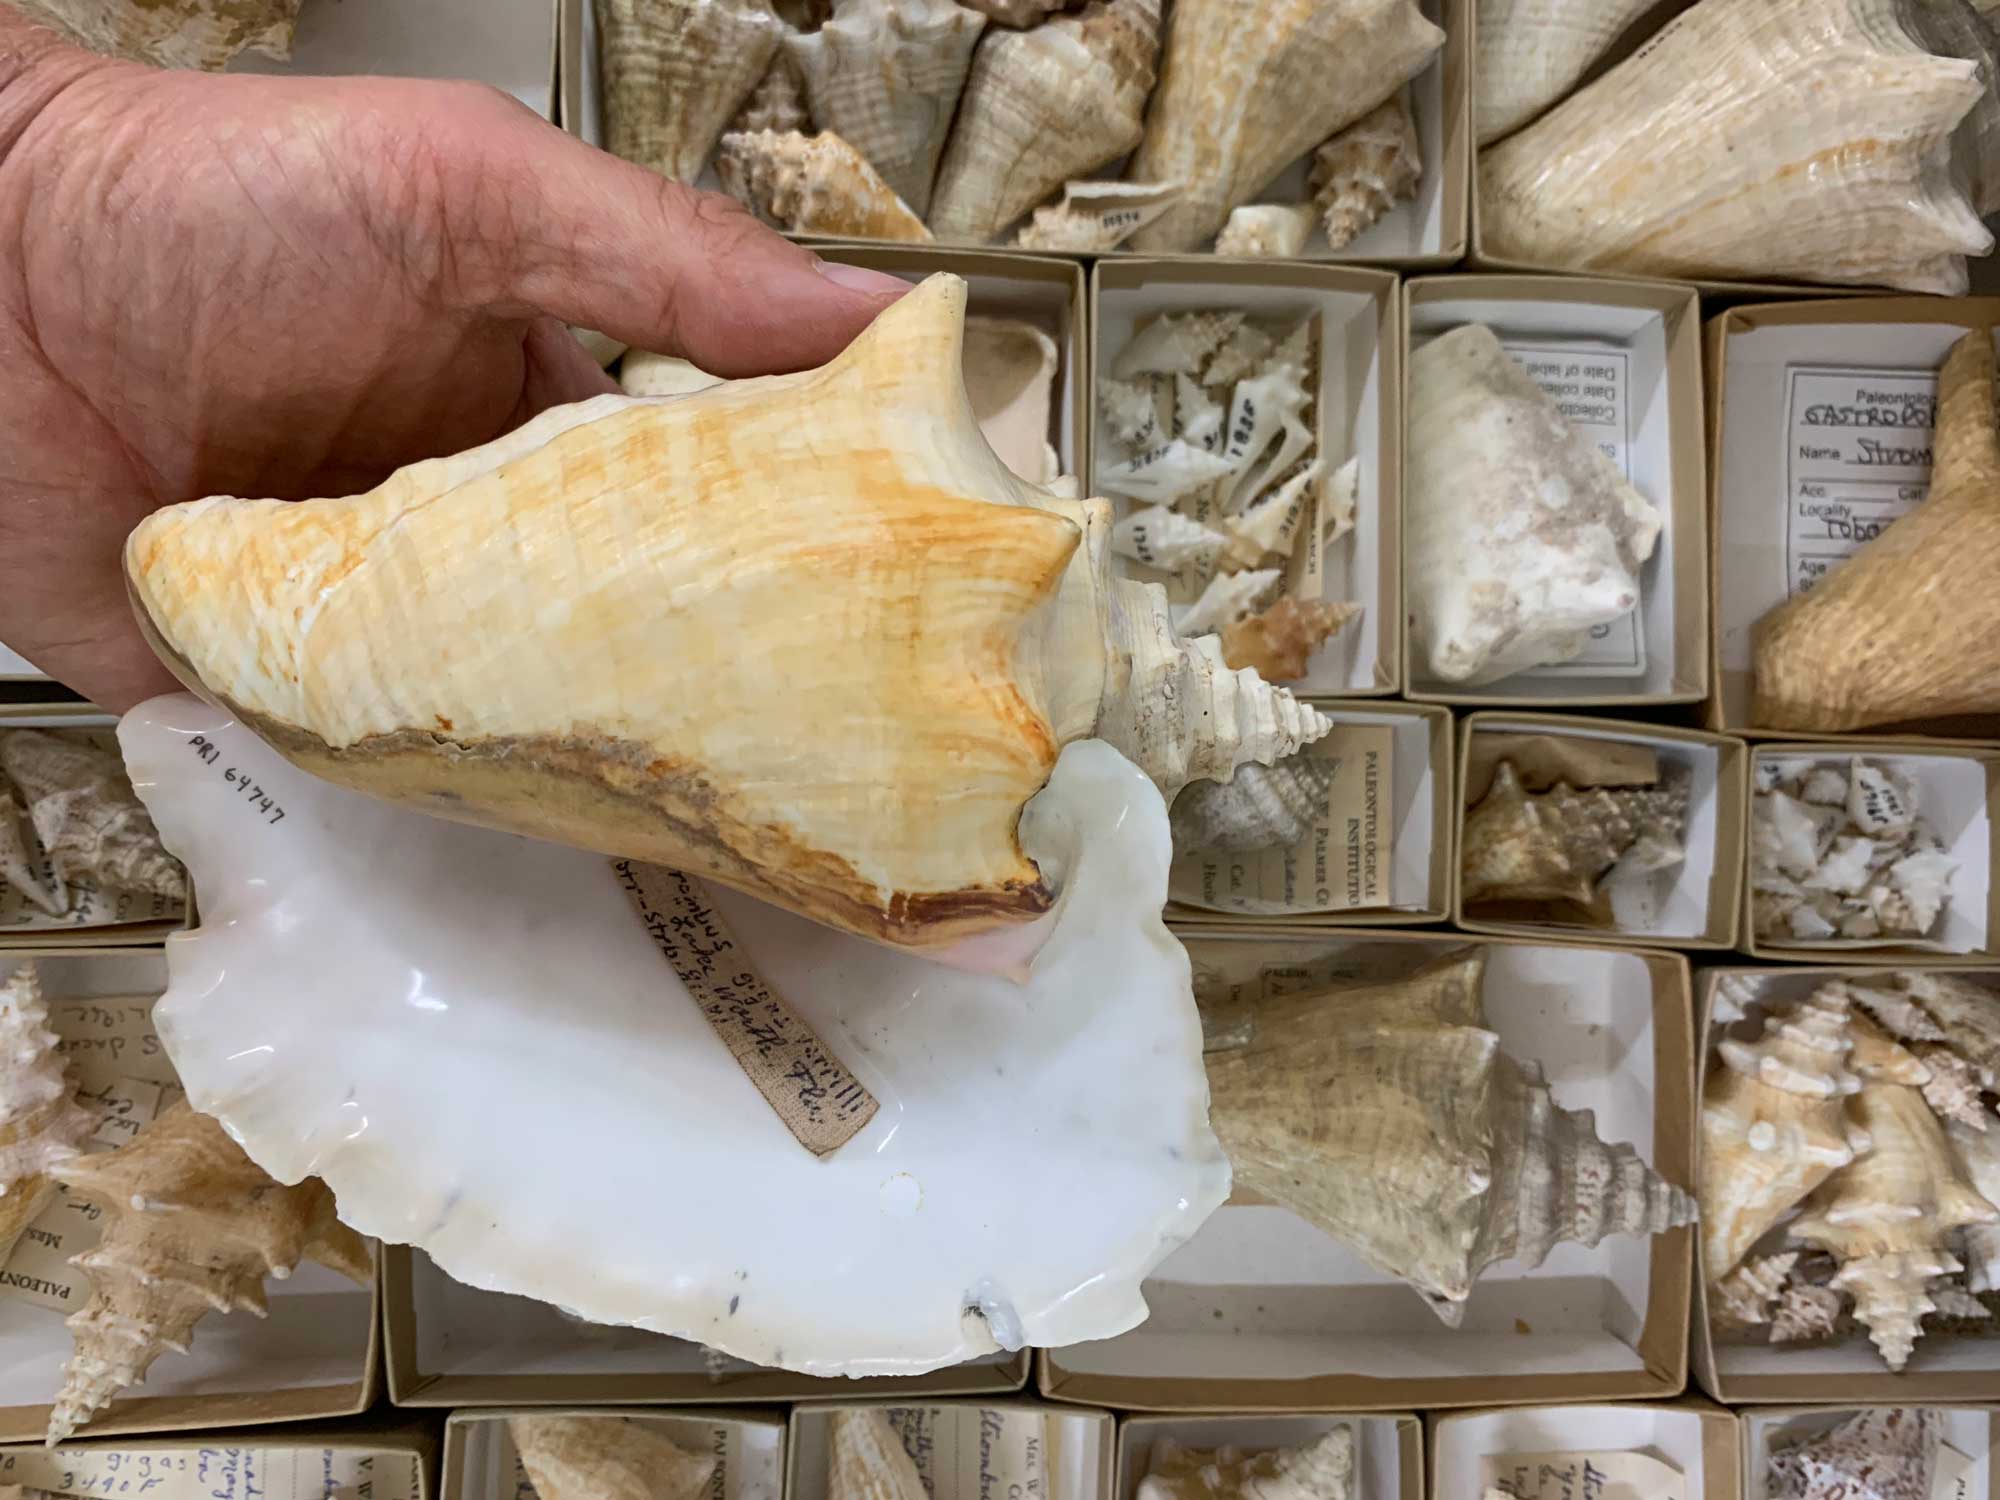 Photograph of a queen conch shell in a museum collection.